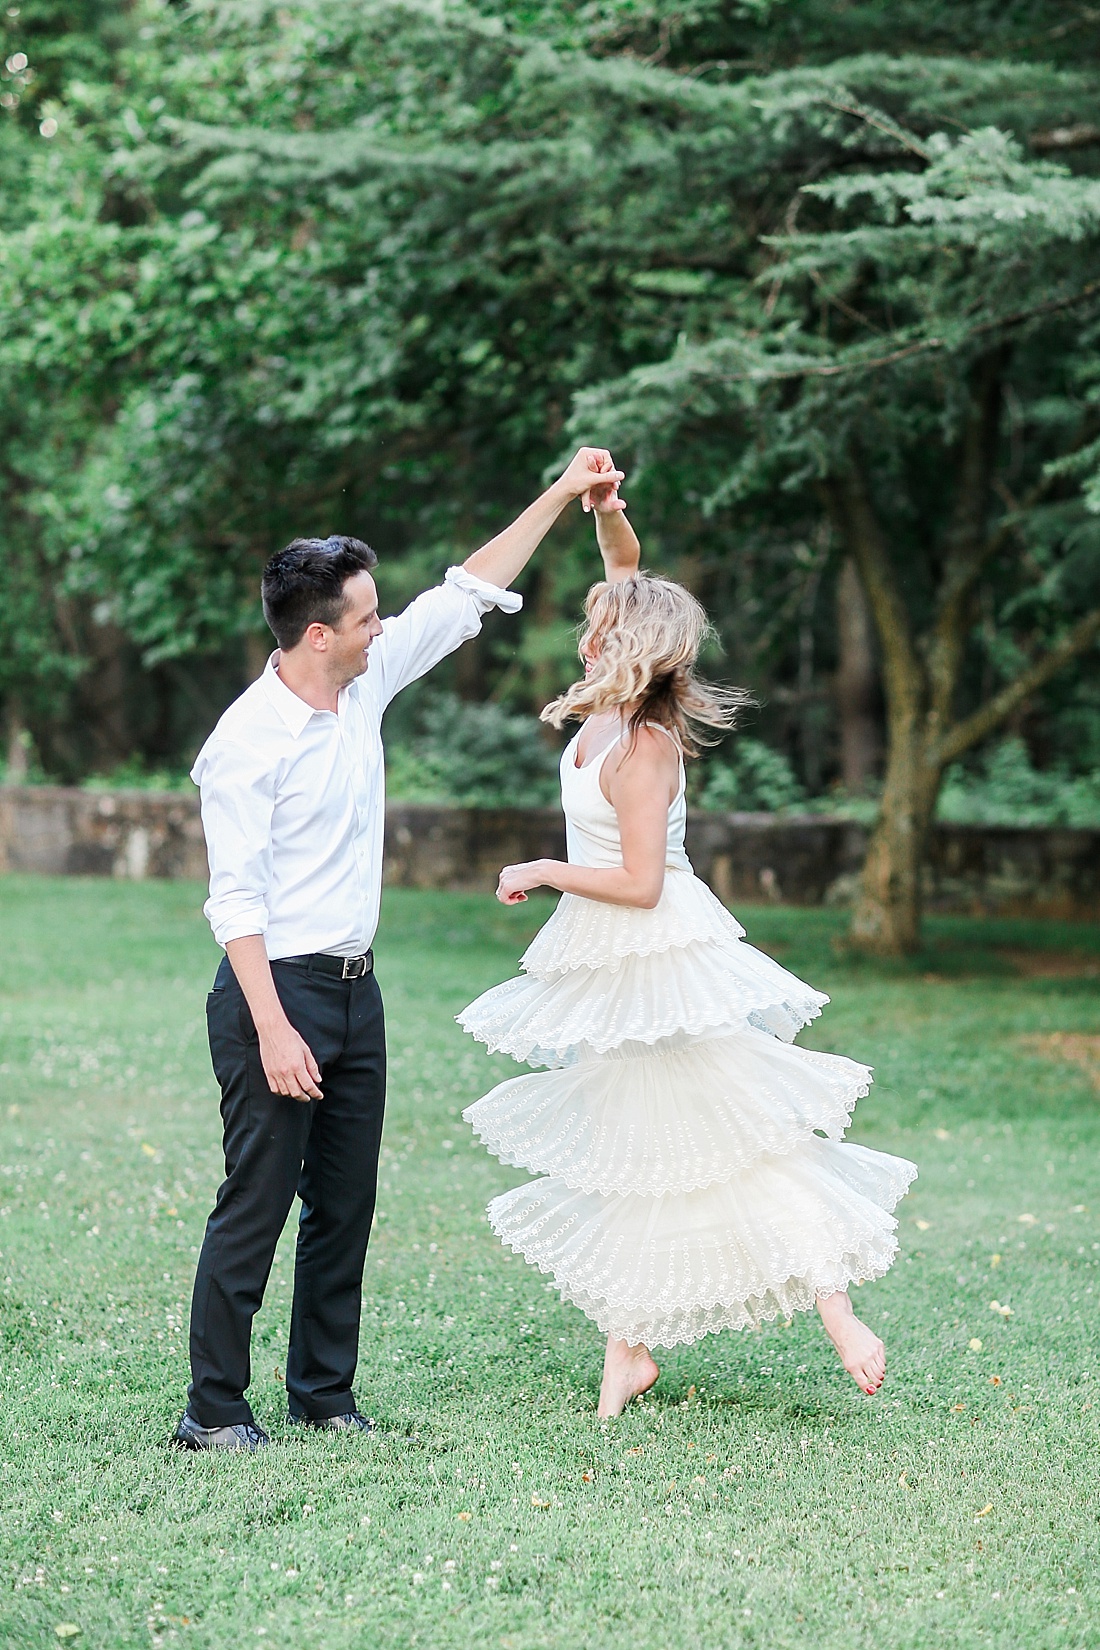 Parachute's Will Anderson & Courtney Kampa's wedding | Abby Grace Photography